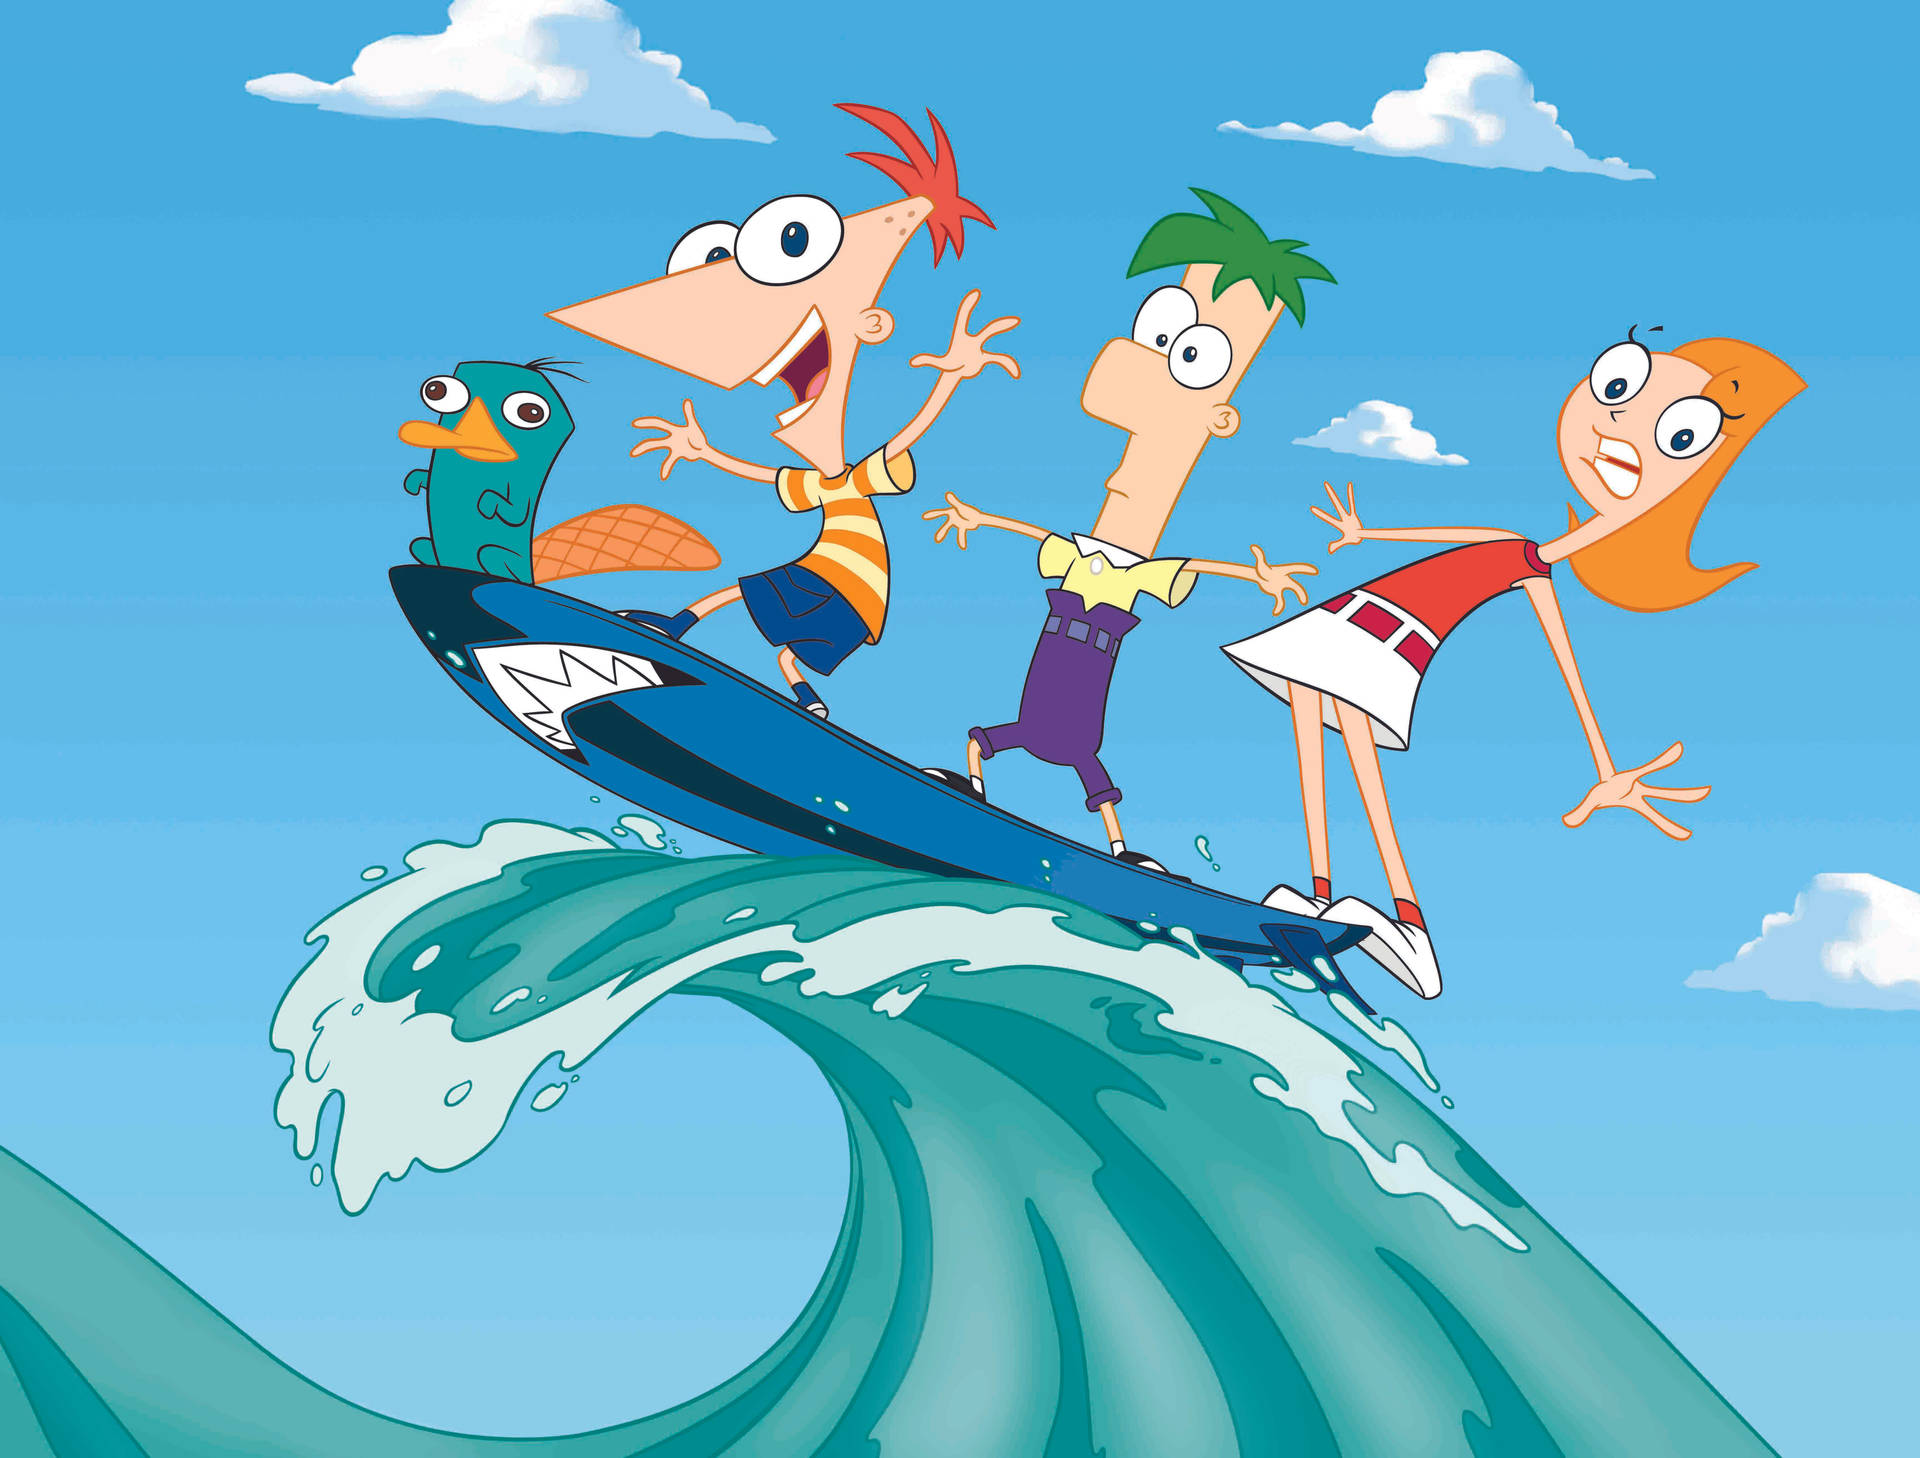 denise hermes recommends Pictures Of Phineas And Ferb